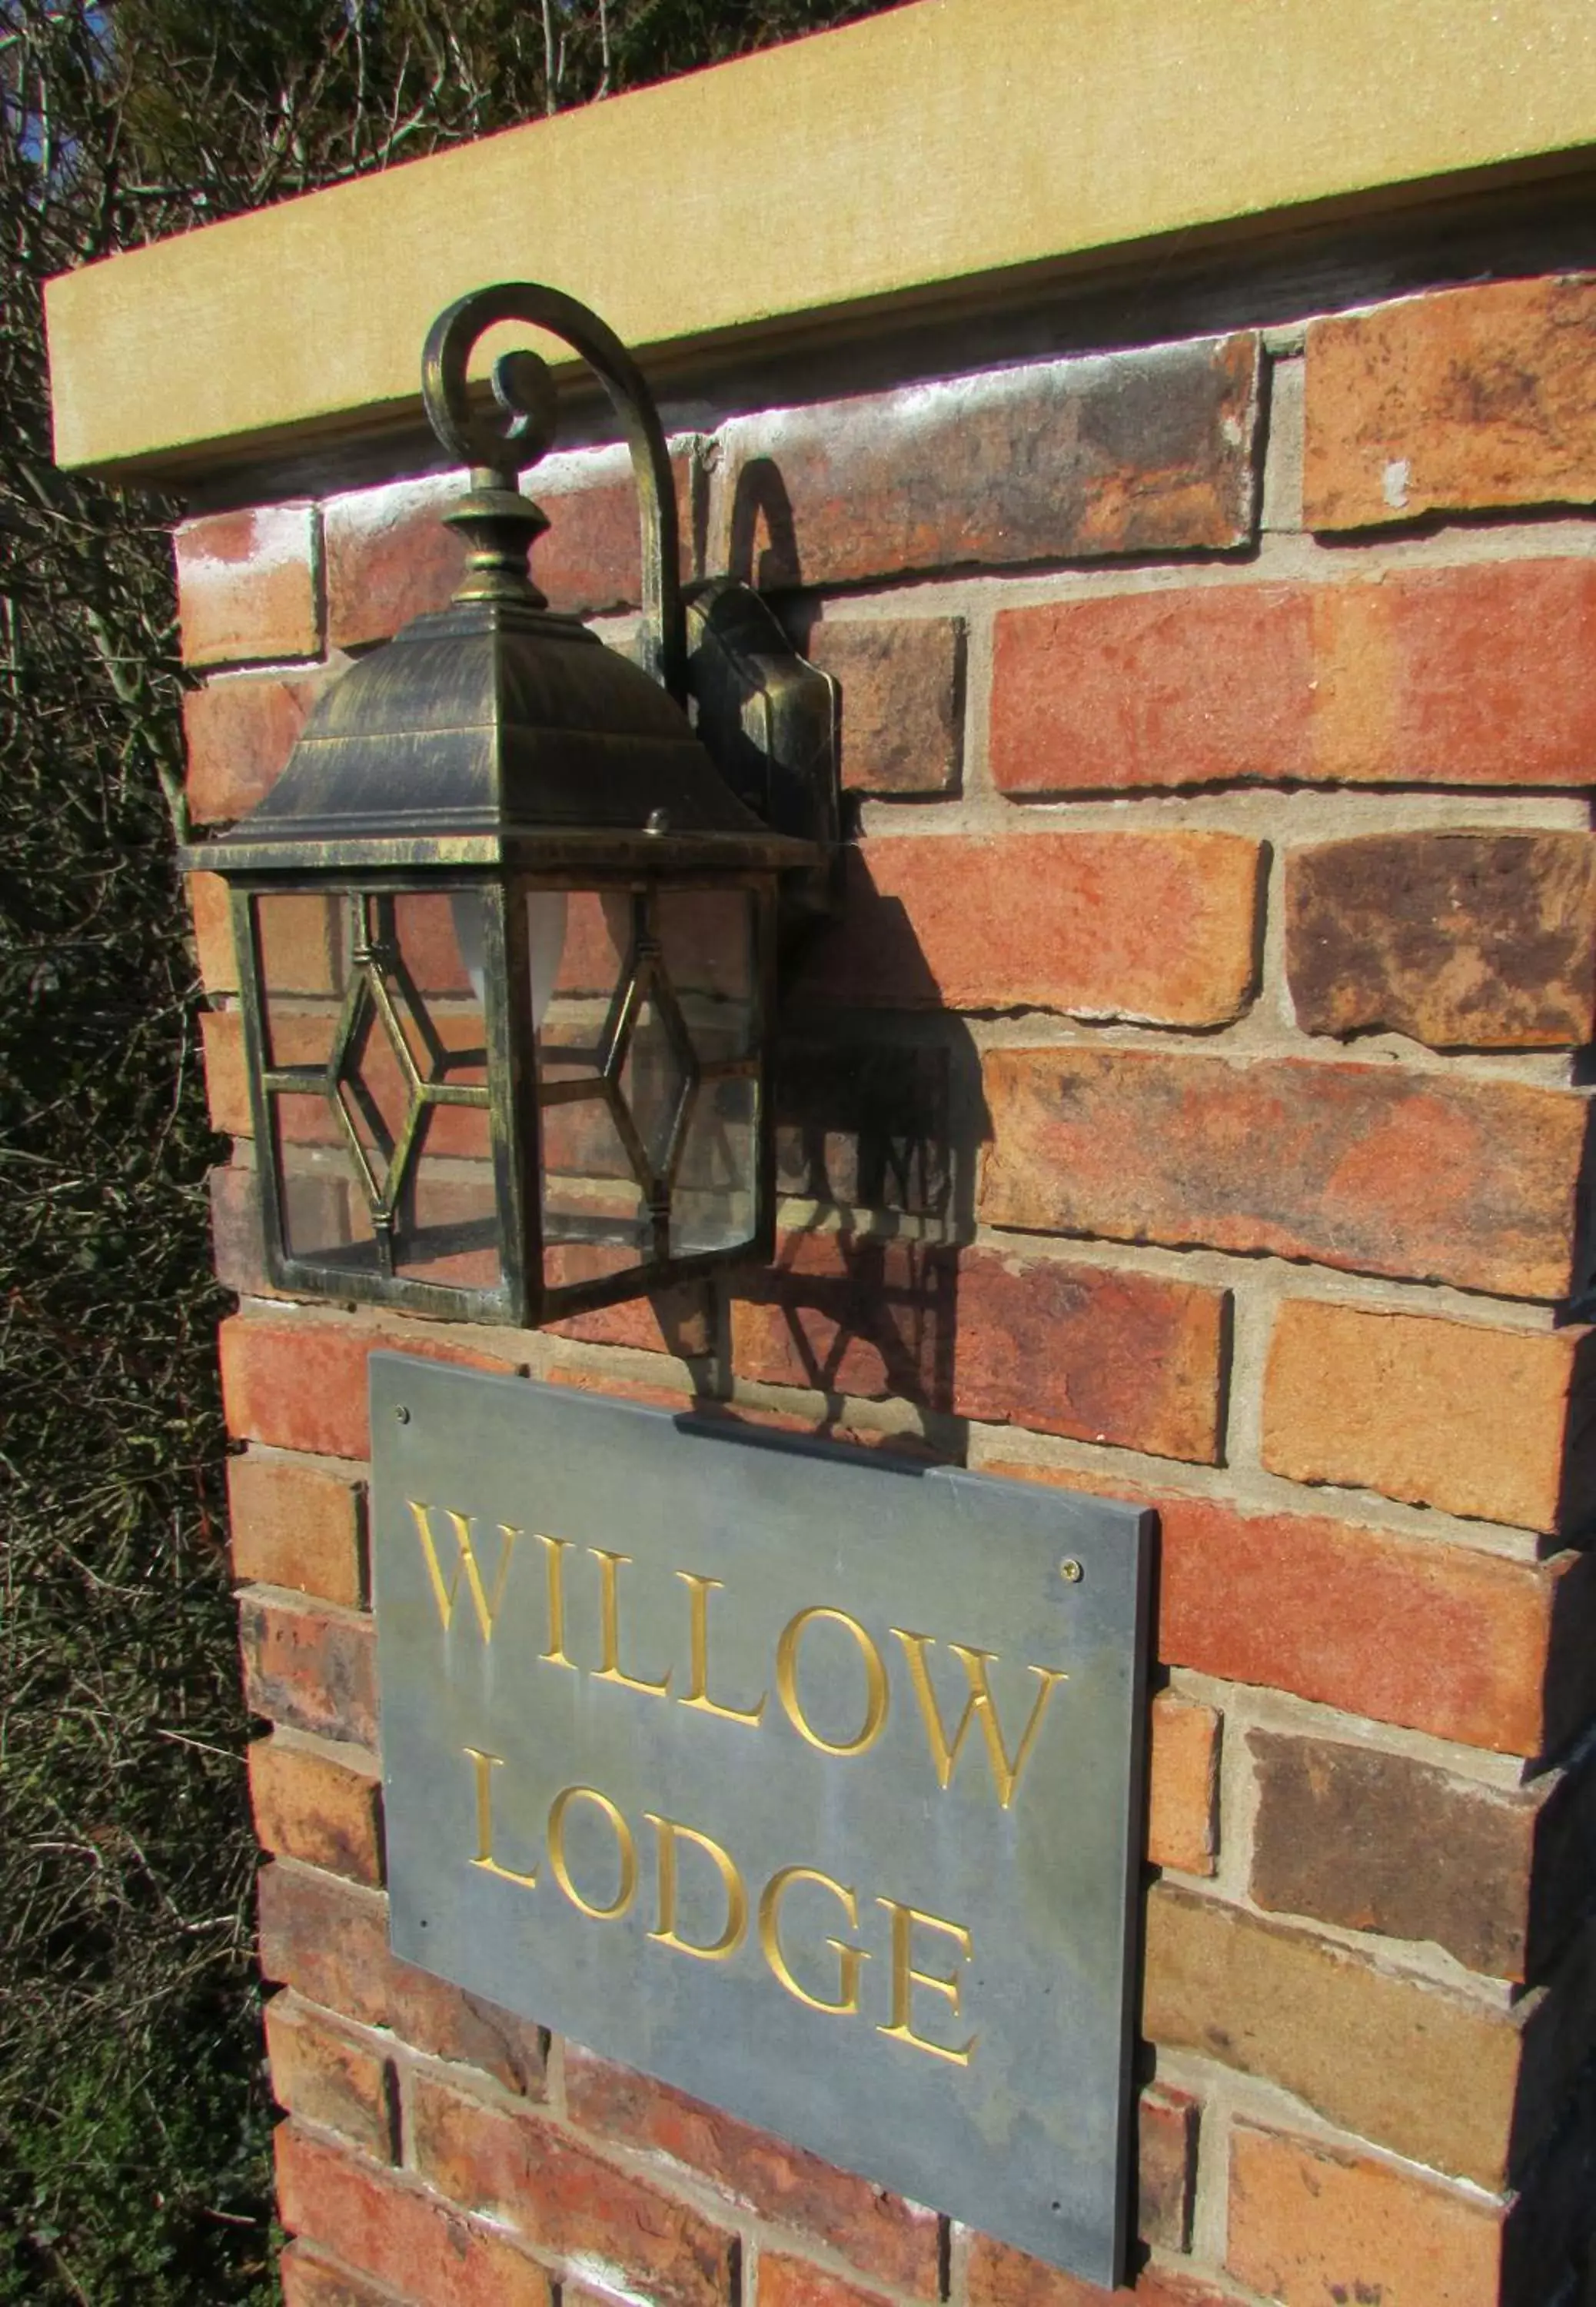 Property logo or sign in Willow Lodge Hambleton